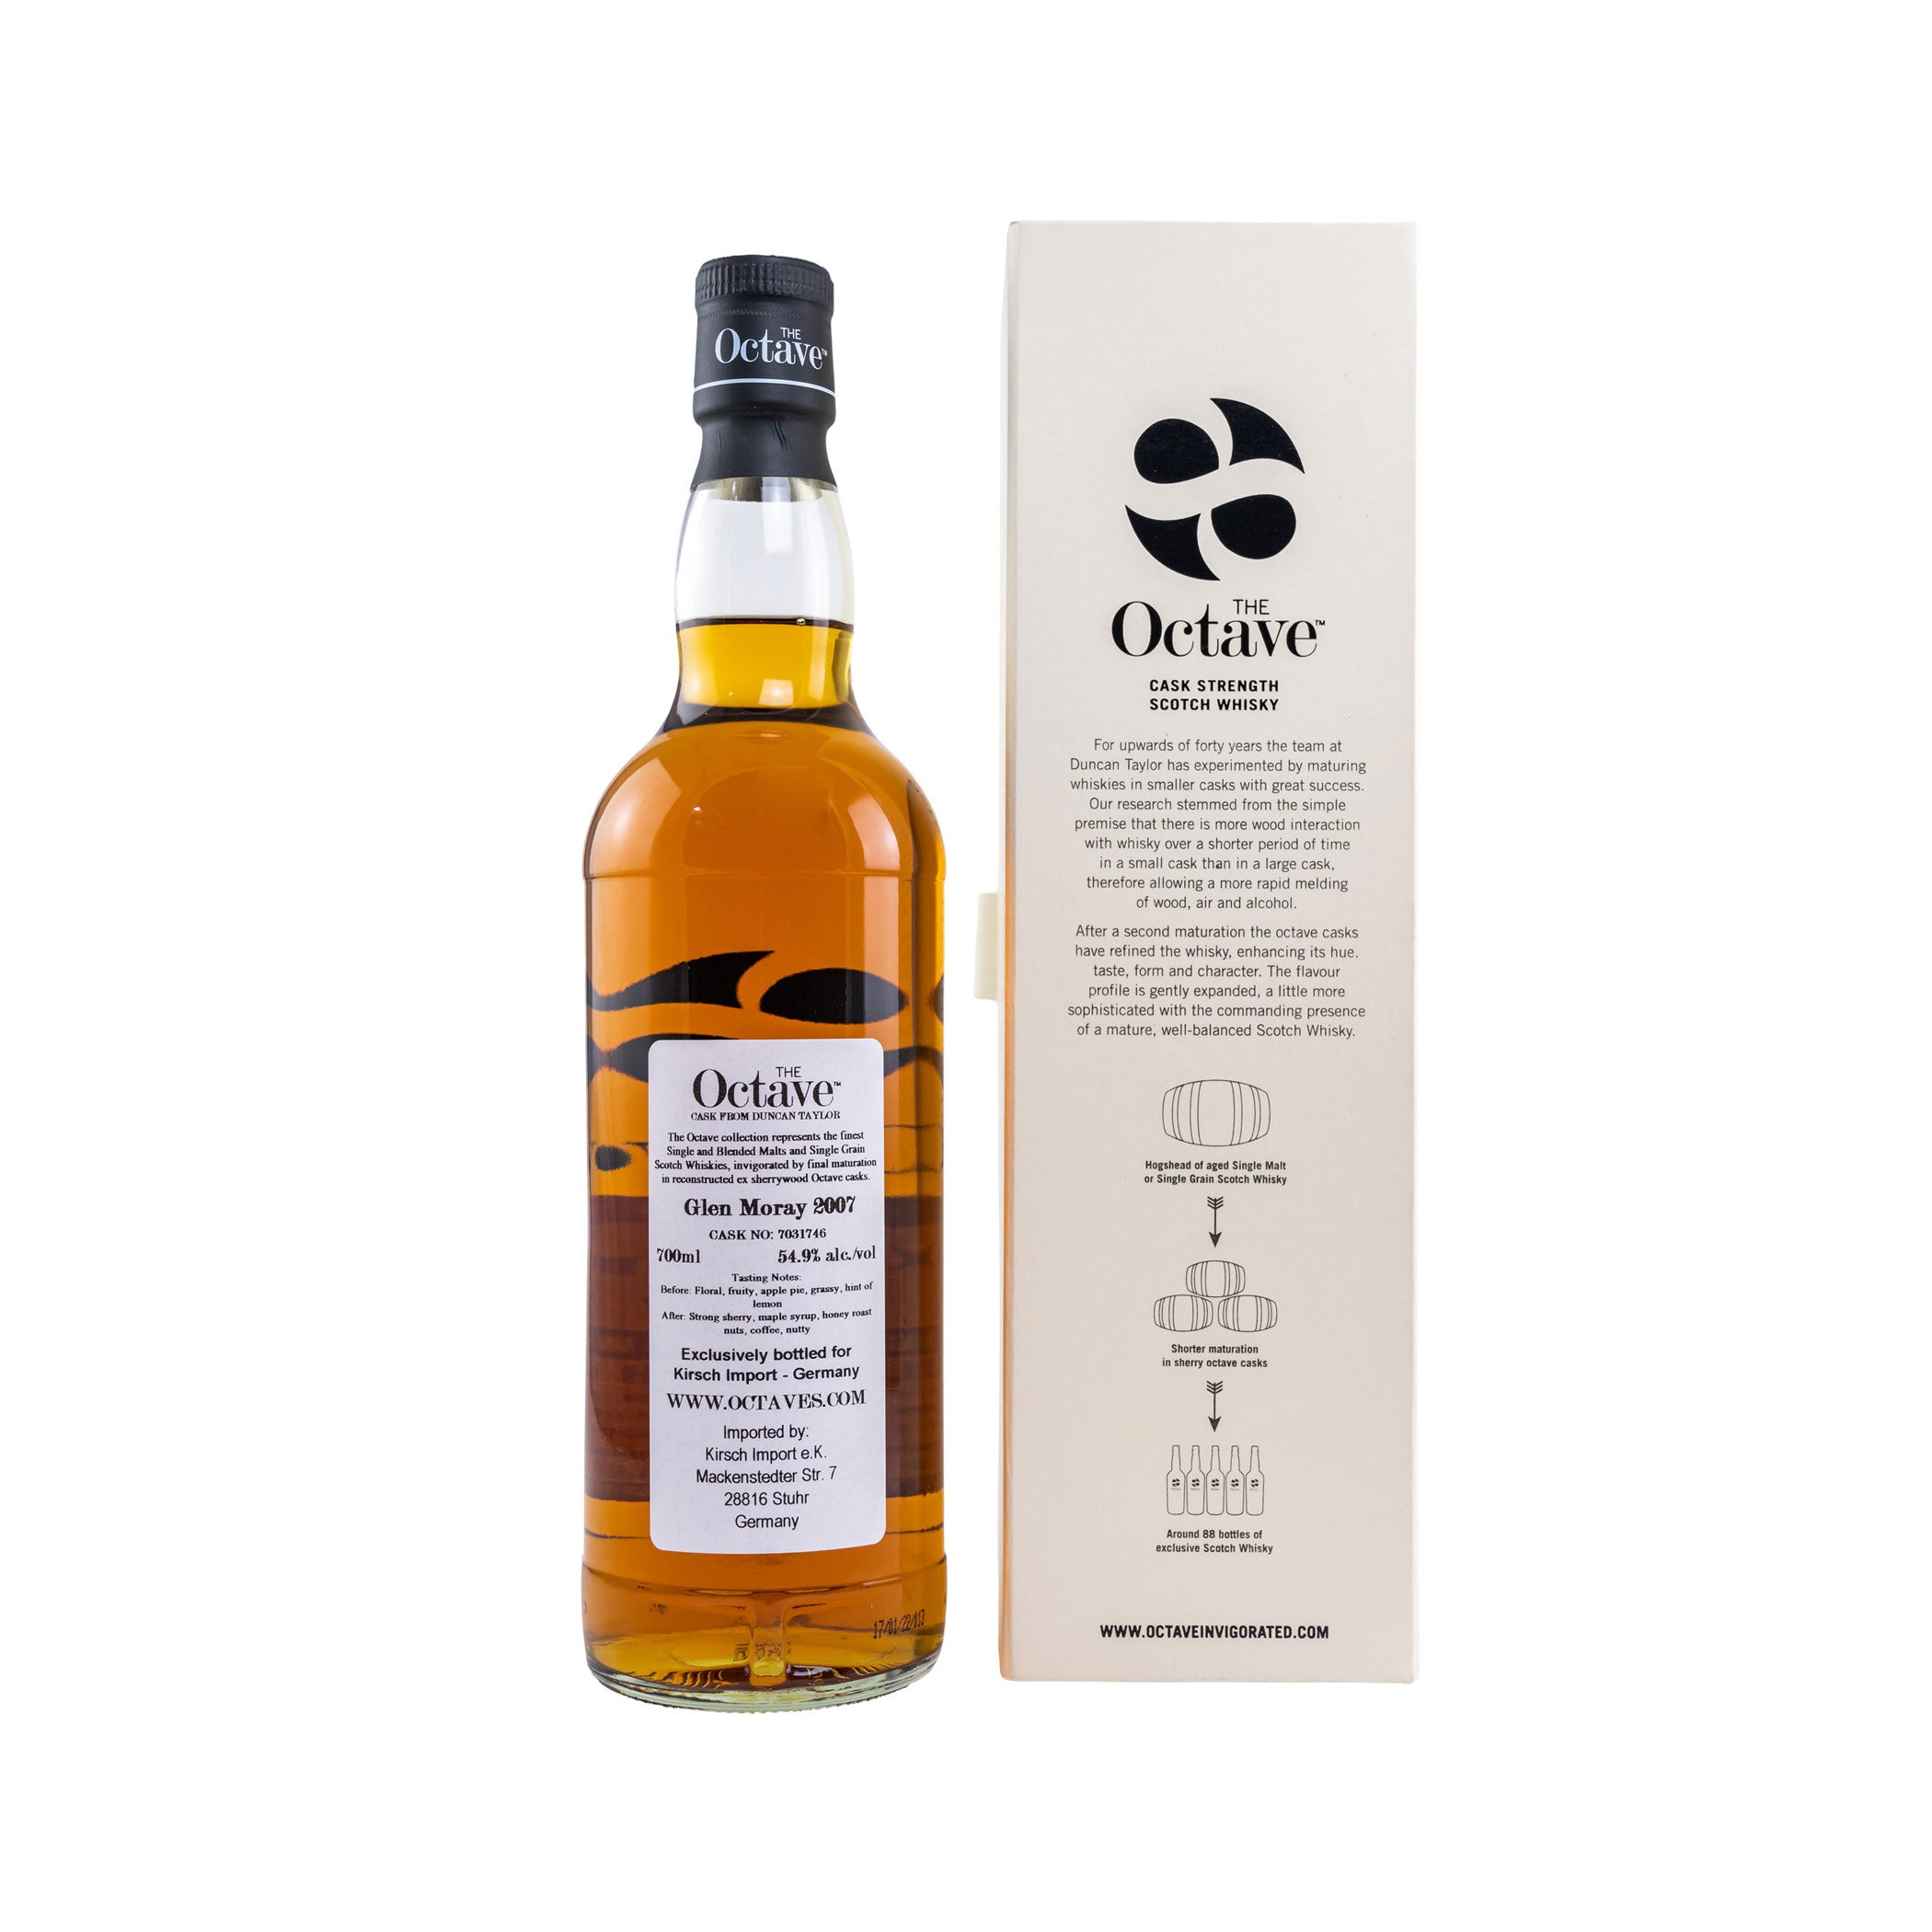 Glen Moray 2007/2022 - 14 Years - Single Cask #7031746 - The Octave (Duncan Taylor)